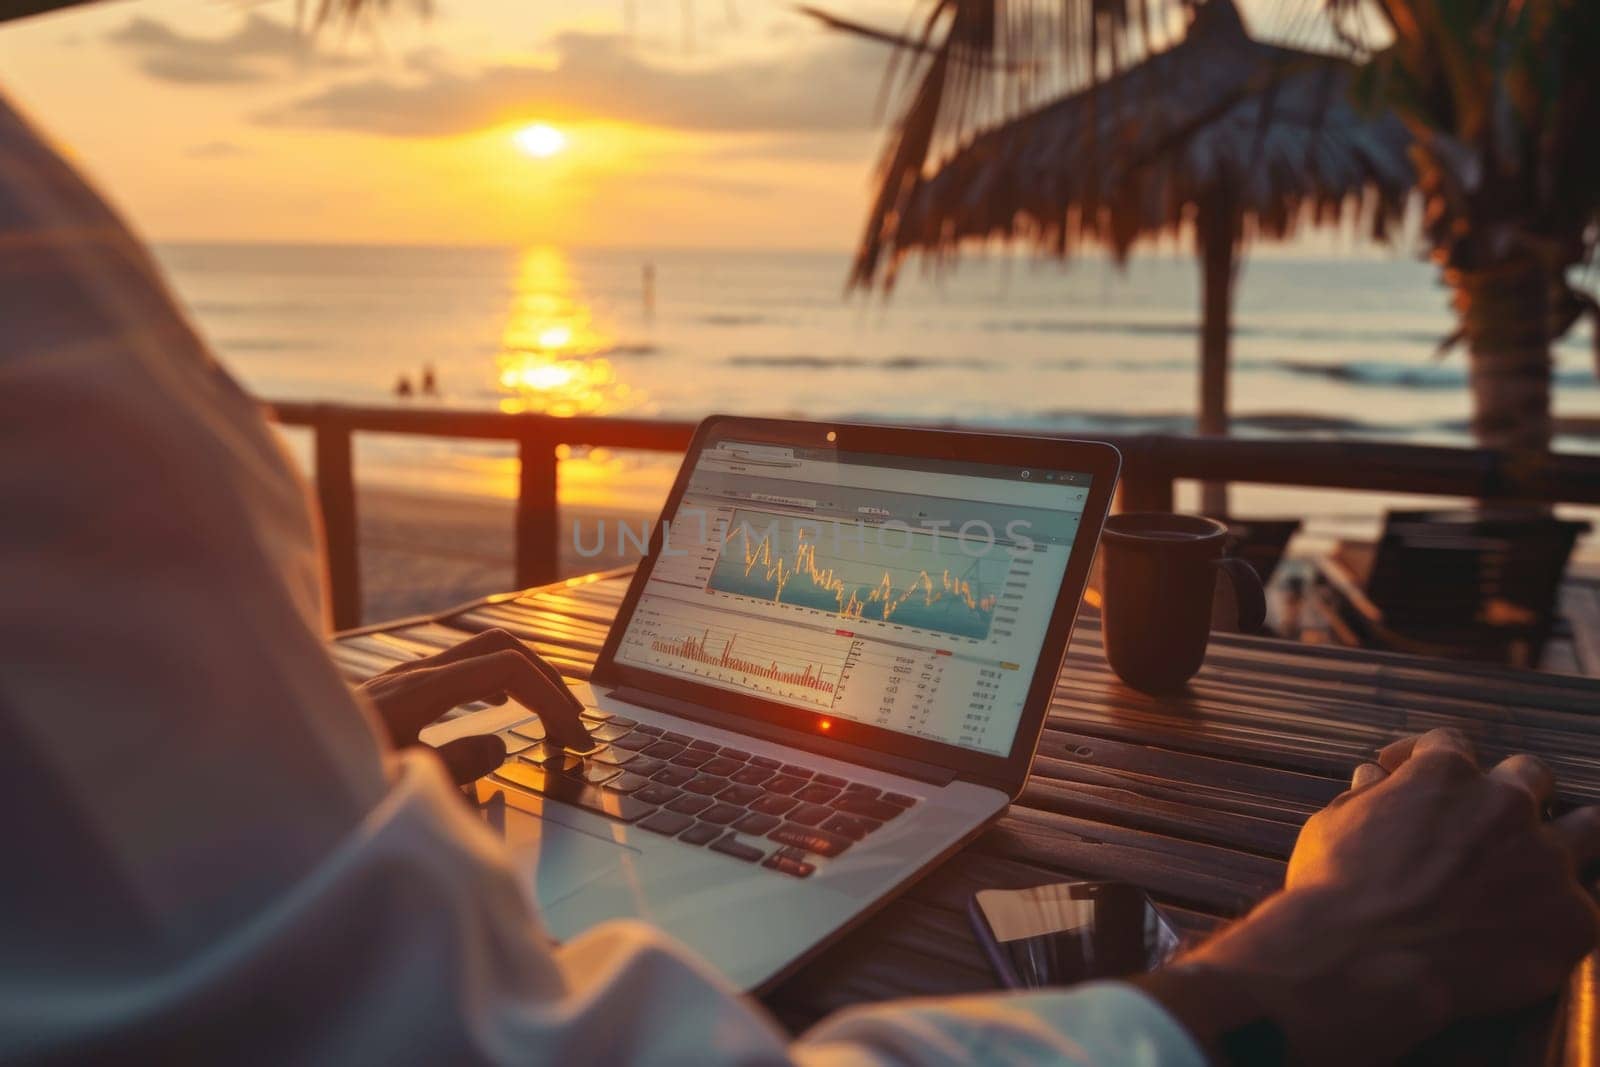 A man is sitting at a table on a beach, working on his laptop. The laptop is open to a screen displaying financial data. The man is wearing a white shirt and he is focused on his work